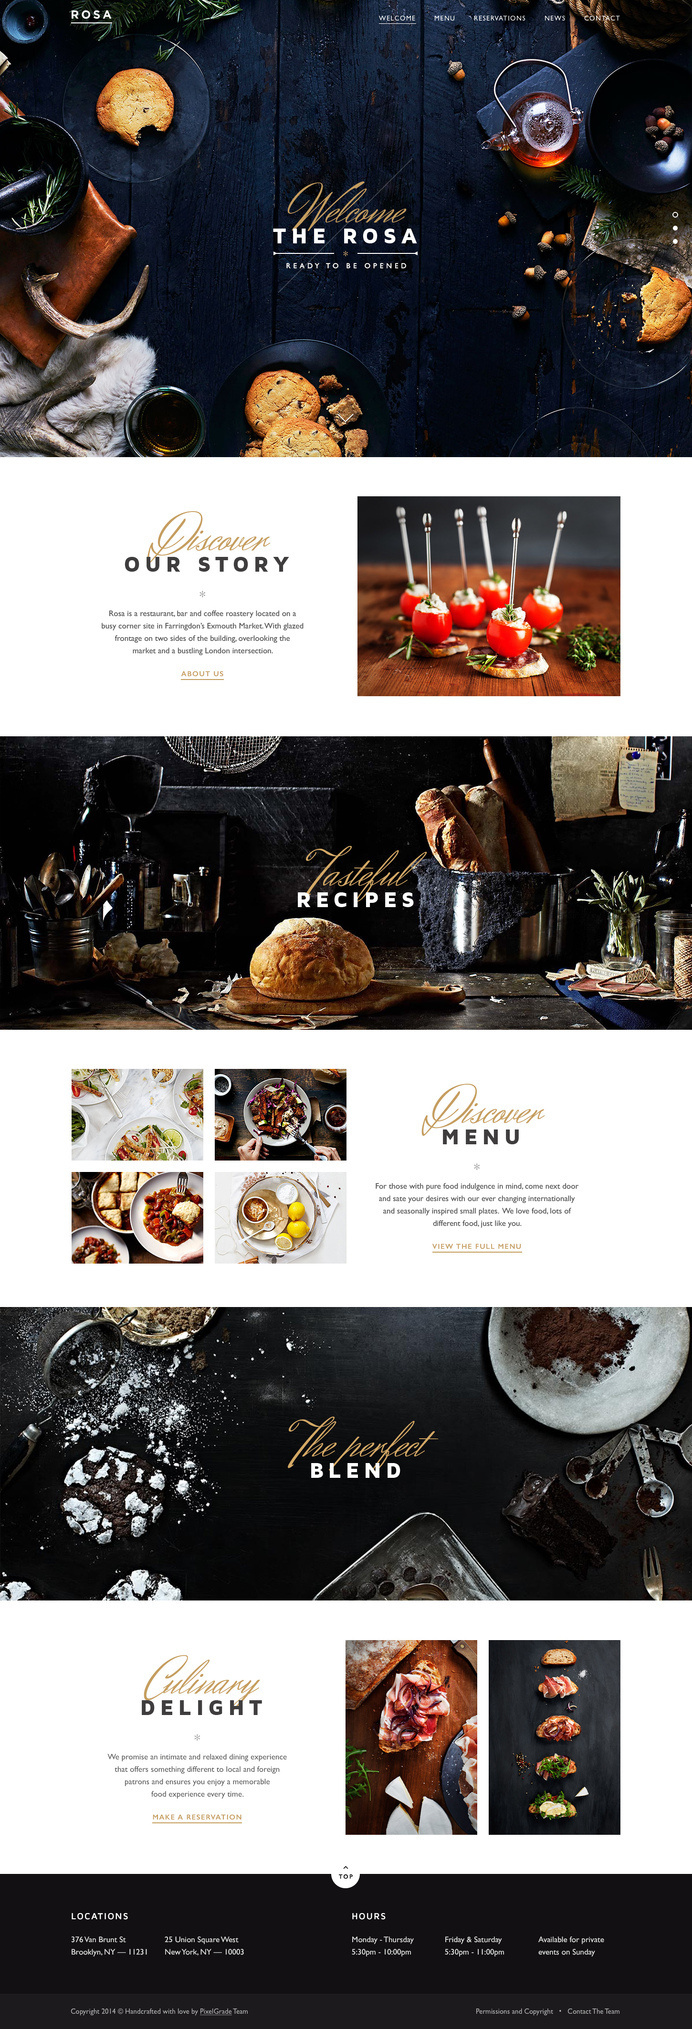 I will design, edit and redesign wix, squarespace, wordpress elementor website